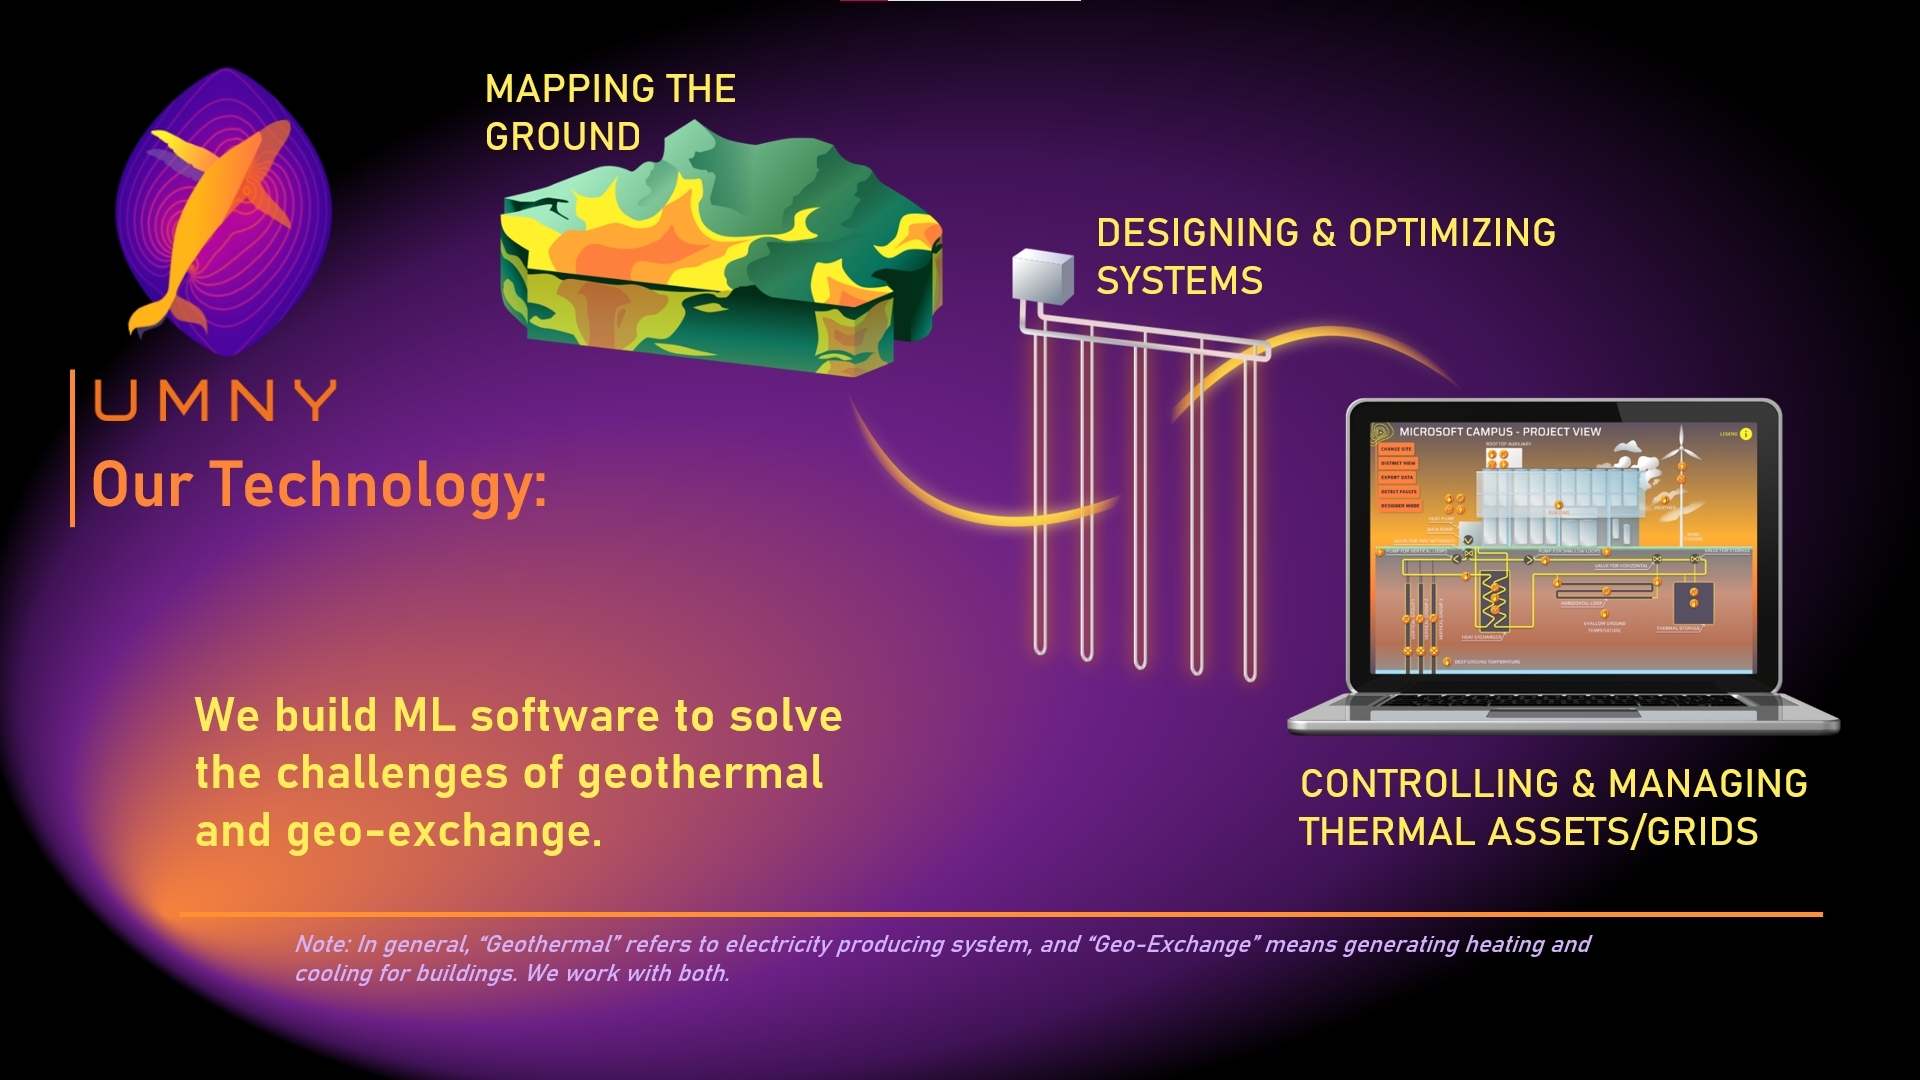 We build ML Software to map the ground, design and optimize systems, and control and manage thermal assets/grids.